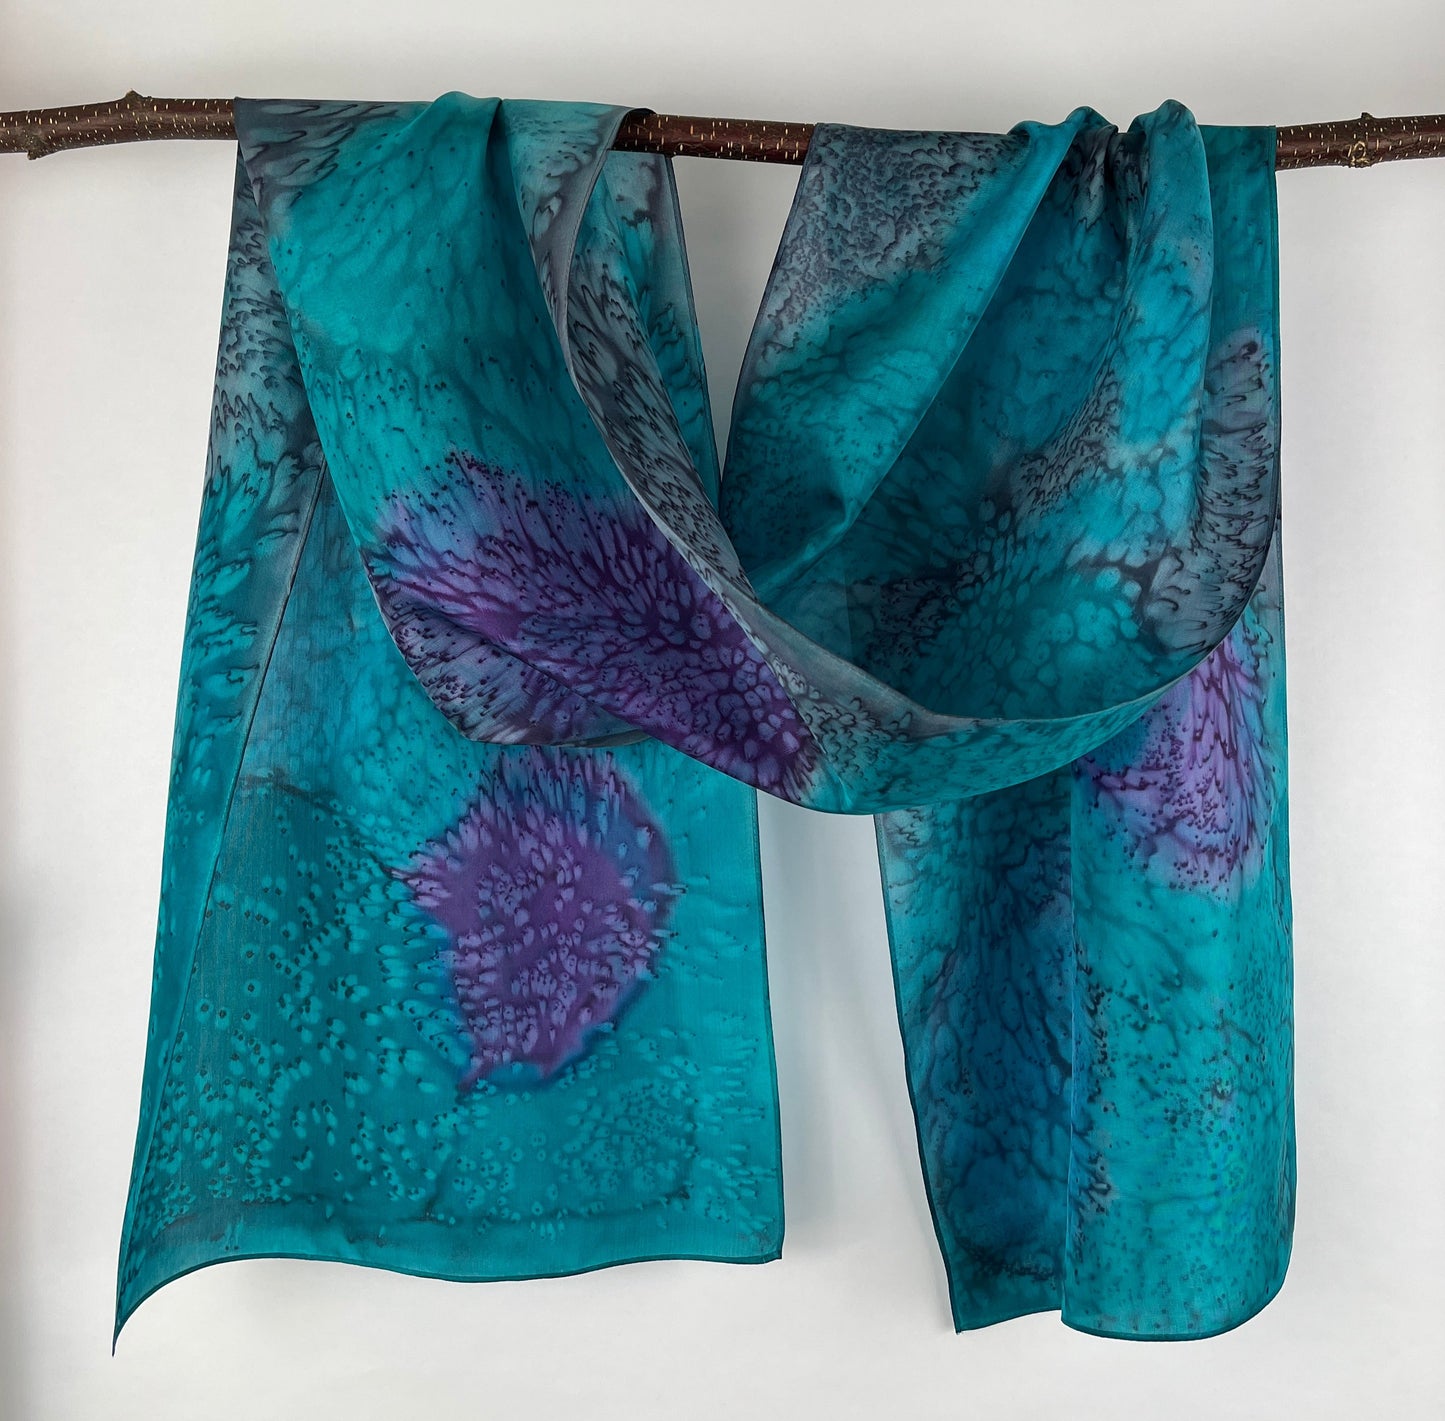 “Purple and Blue Mermaid” - Hand-dyed Silk Scarf - $115